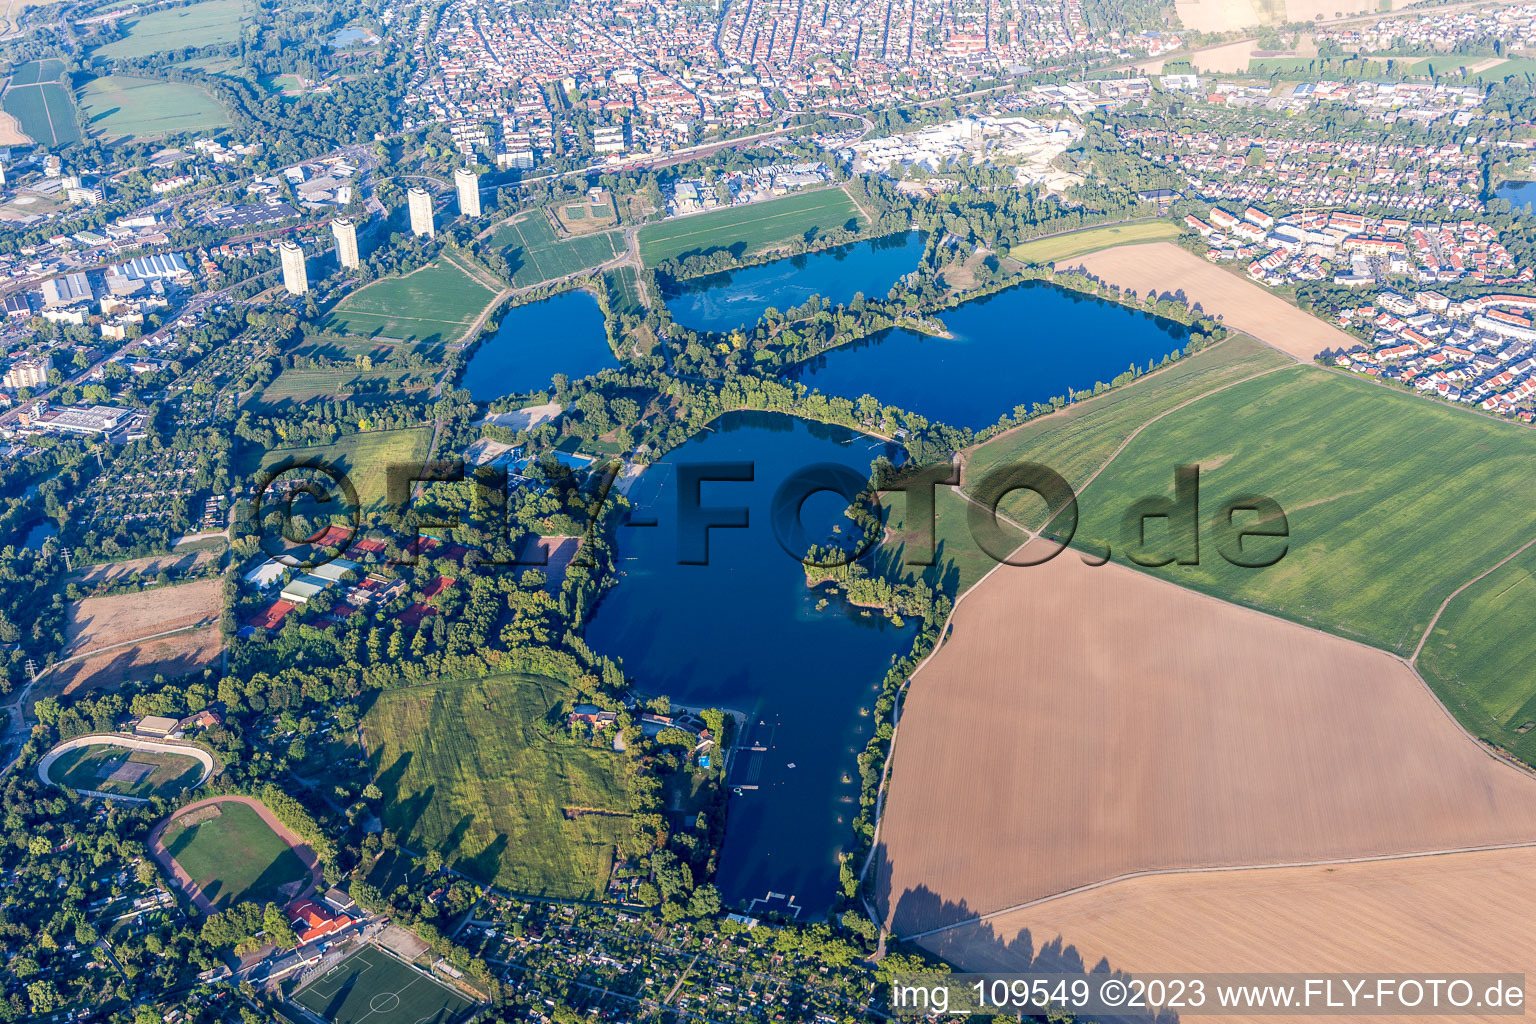 City view of the downtown area on the shore areas of Freibad on Willersinnweiher in the district Friesenheim in Ludwigshafen am Rhein in the state Rhineland-Palatinate, Germany